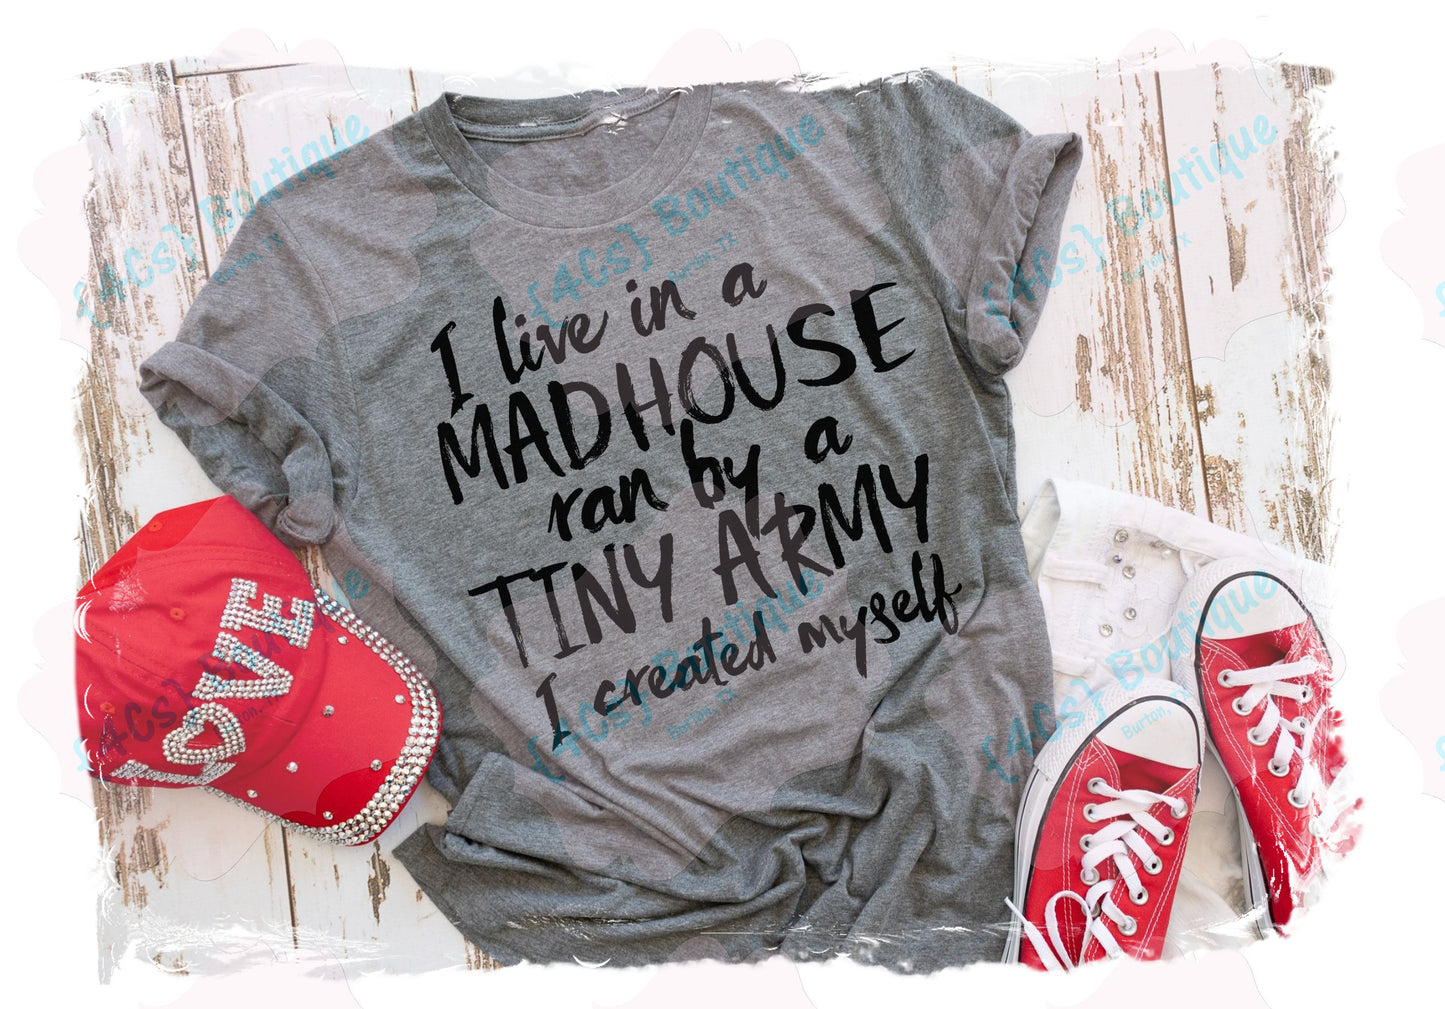 I Live In A Madhouse Ran By A Tiny Army I Created Myself Shirt